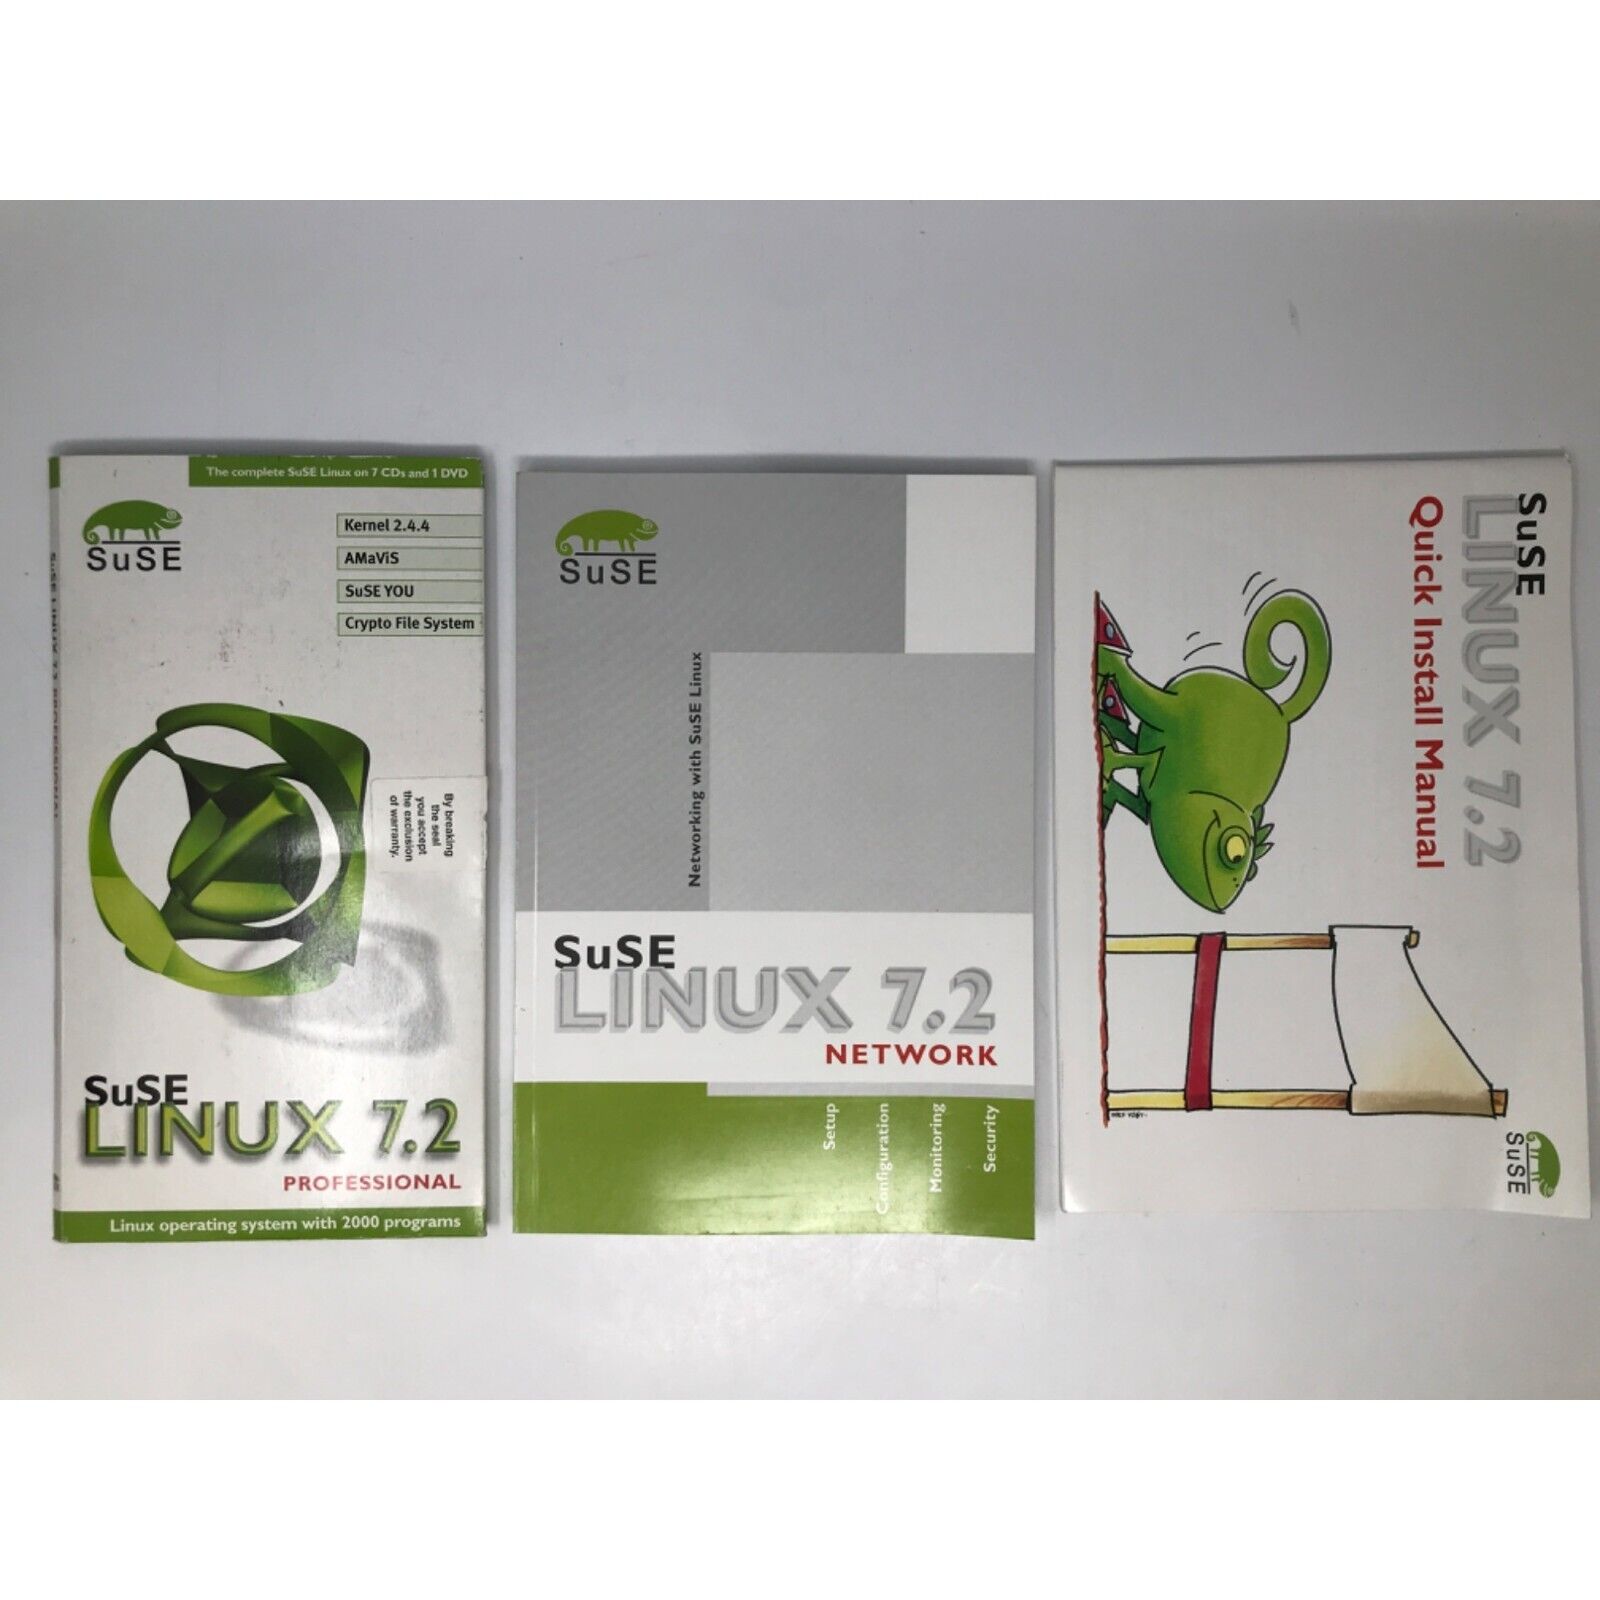 SuSE LINUX 7.2 Professional Software Package w/ Quick Install & Network Manuals